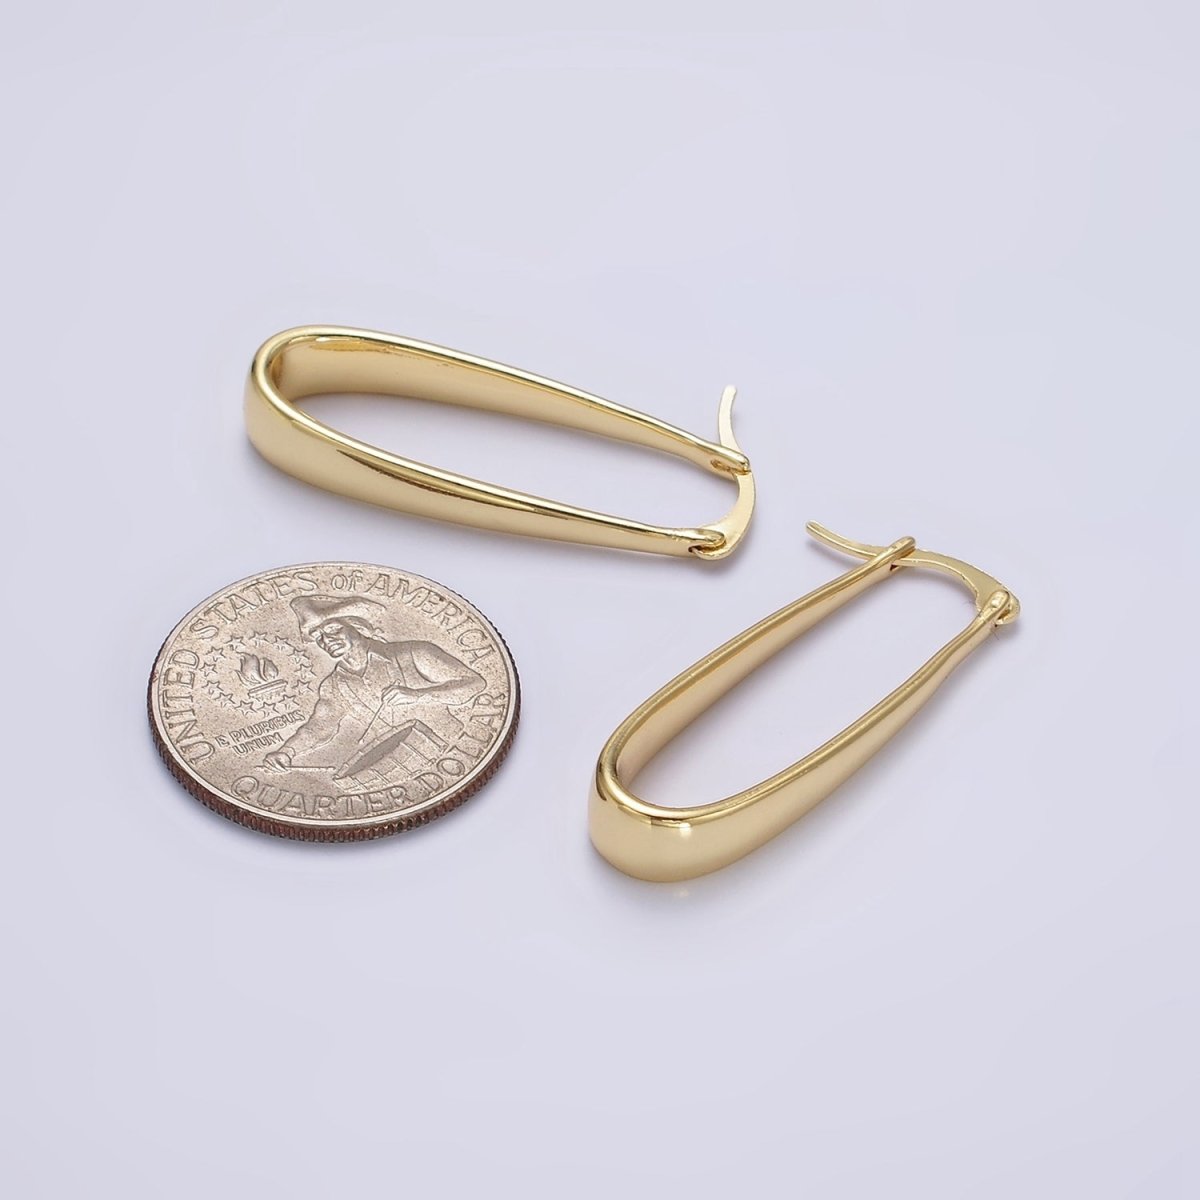 24K Gold Filled 35mm Oblong Dome French Lock Latch Hoop Earrings in Gold & Silver | AE606 AE607 - DLUXCA